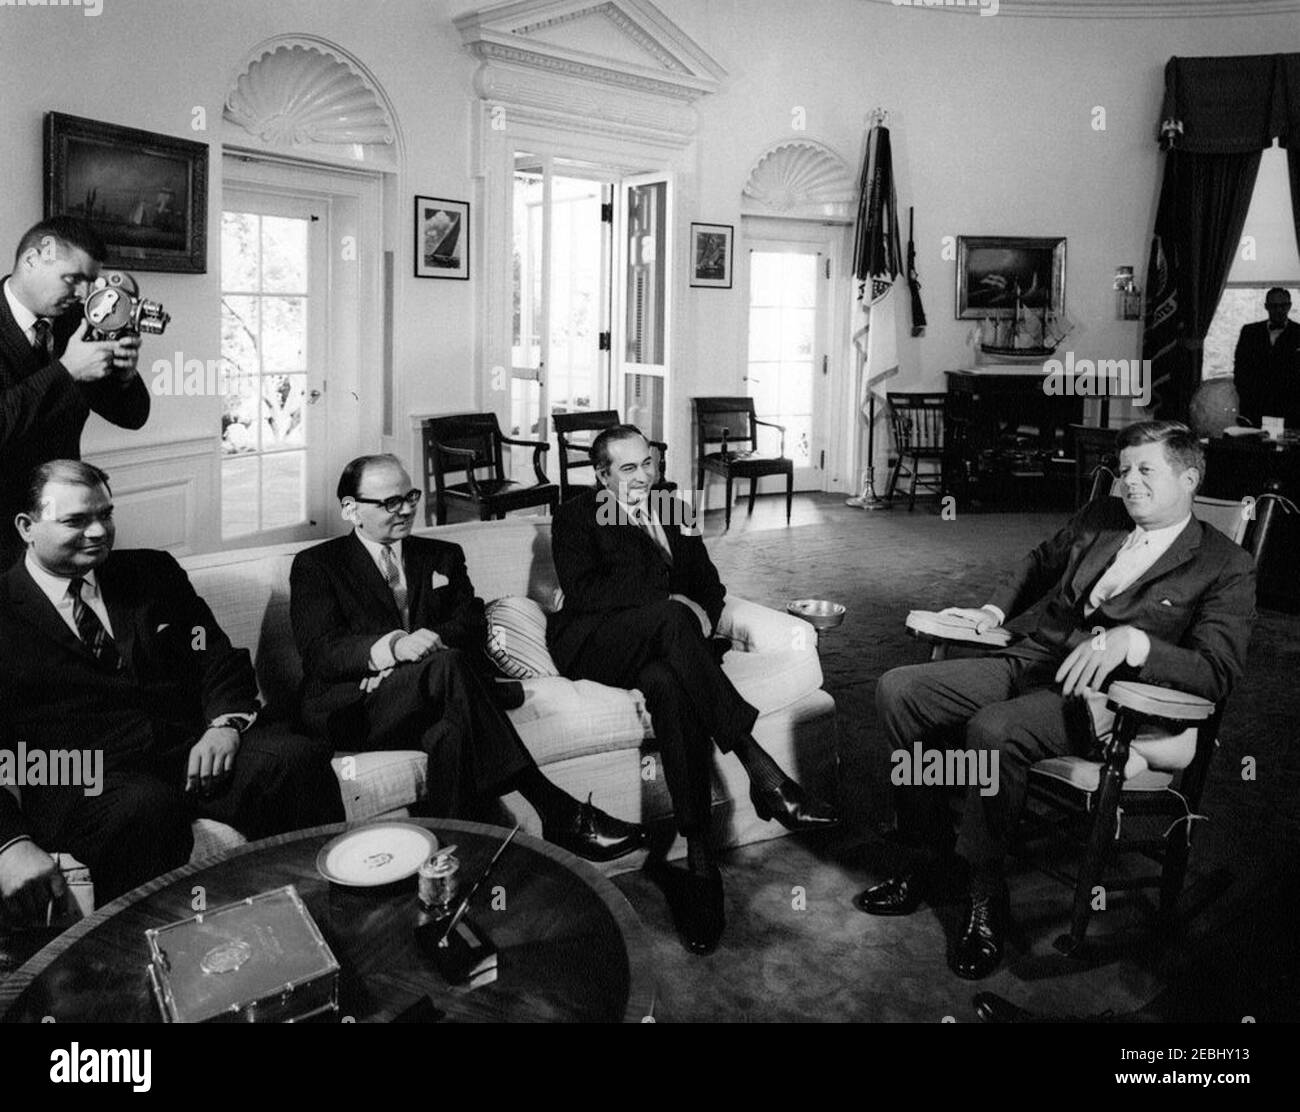 Meeting with Zulfiqar Ali Bhutto, Foreign Minister of Pakistan, 4:00PM. President John F. Kennedy (in rocking chair) meets with Foreign Minister of Pakistan, Zulfikar (Zulfiqar) Ali Bhutto. Seated (L-R): First Secretary of the Embassy of Pakistan, Mujahid Ali Jafri; Ambassador of Pakistan, Ghulam Ahmed; Minister Bhutto; and President Kennedy. An unidentified photographer stands at far left. Oval Office, White House, Washington, D.C. Stock Photo